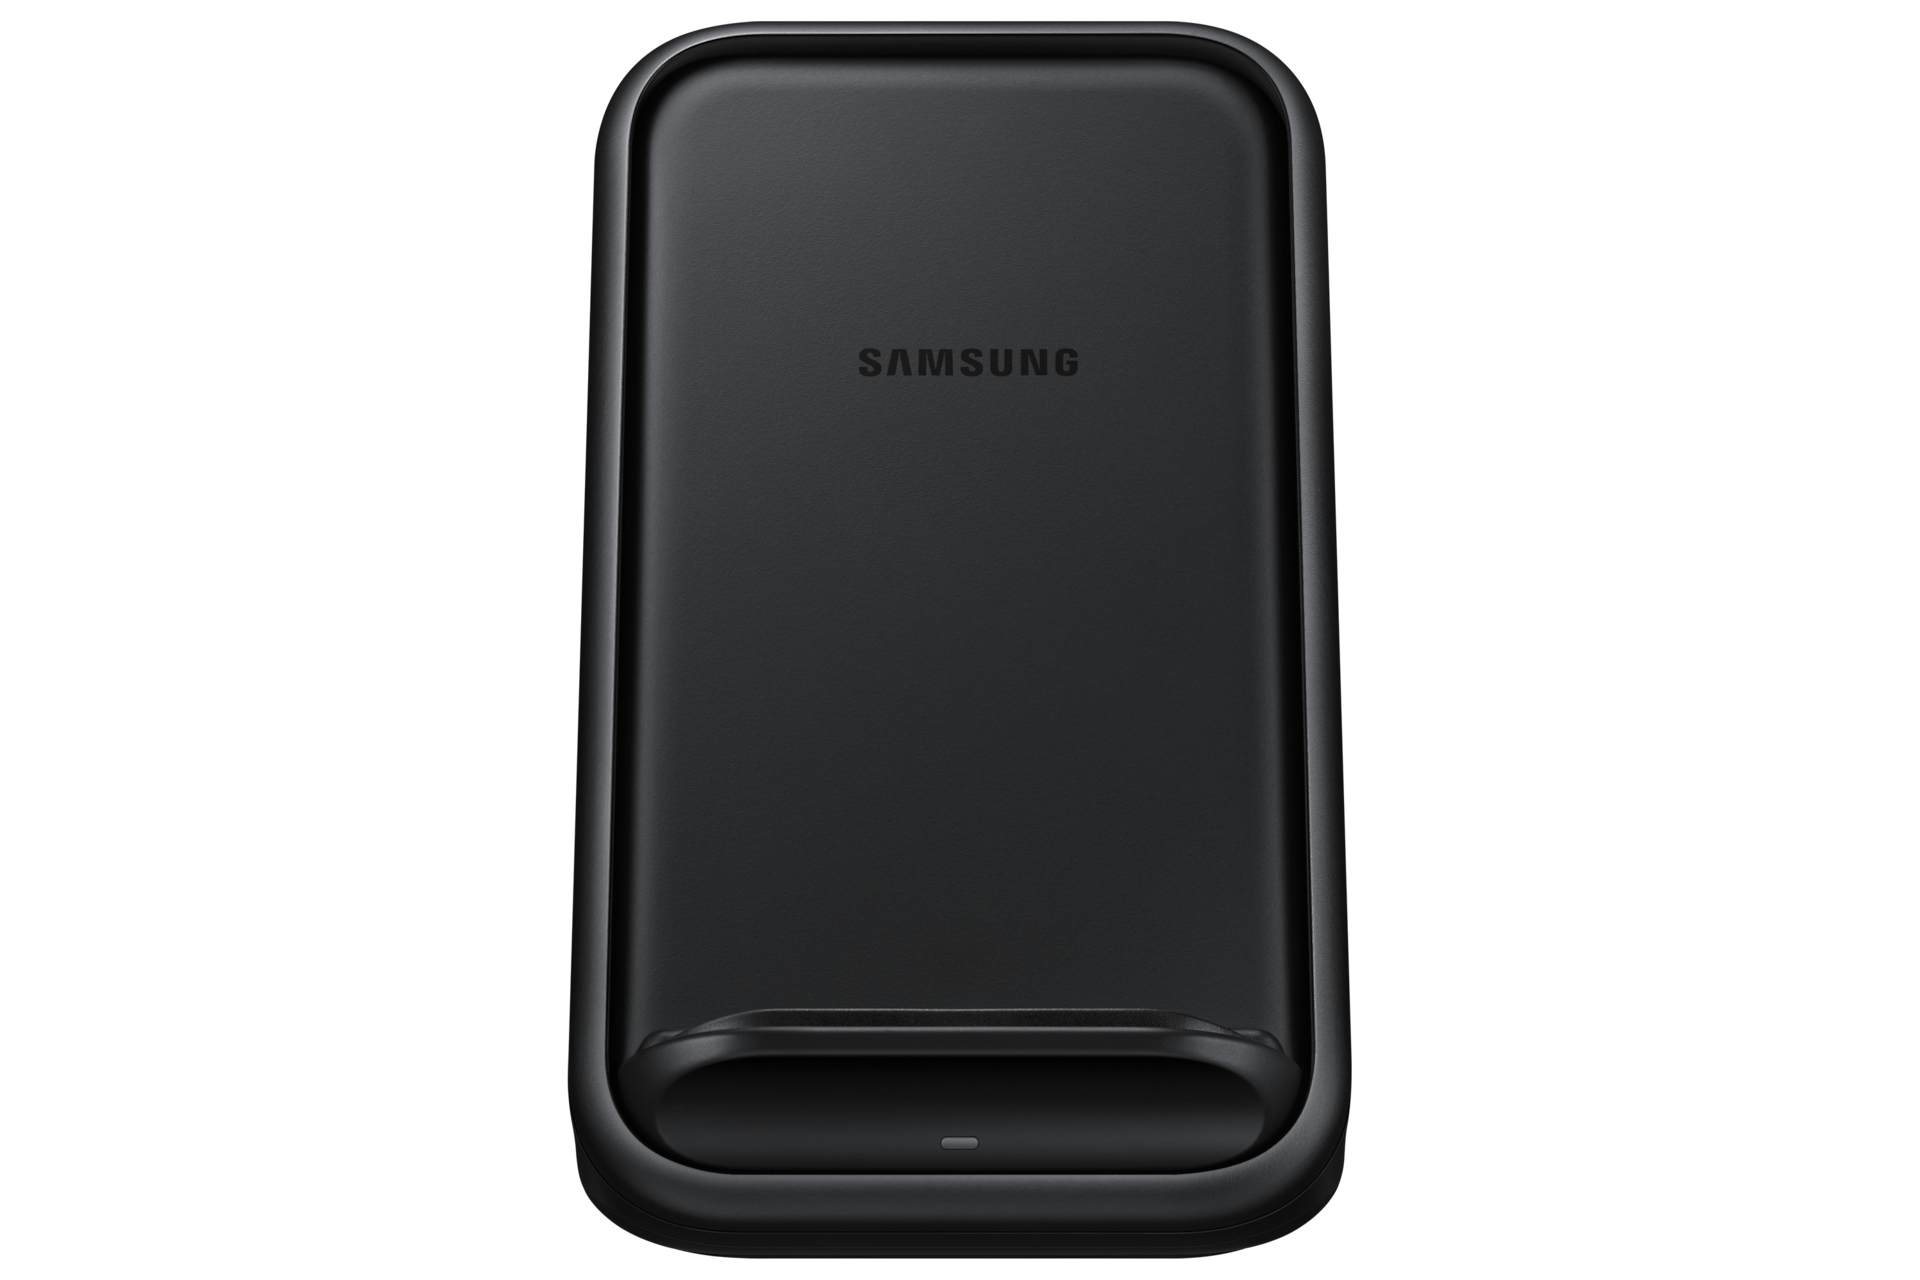 https://images.samsung.com/is/image/samsung/levant-wireless-charger-stand-ep-n5200-ep-n5200tbegww-frontblack-250629184?$650_519_PNG$